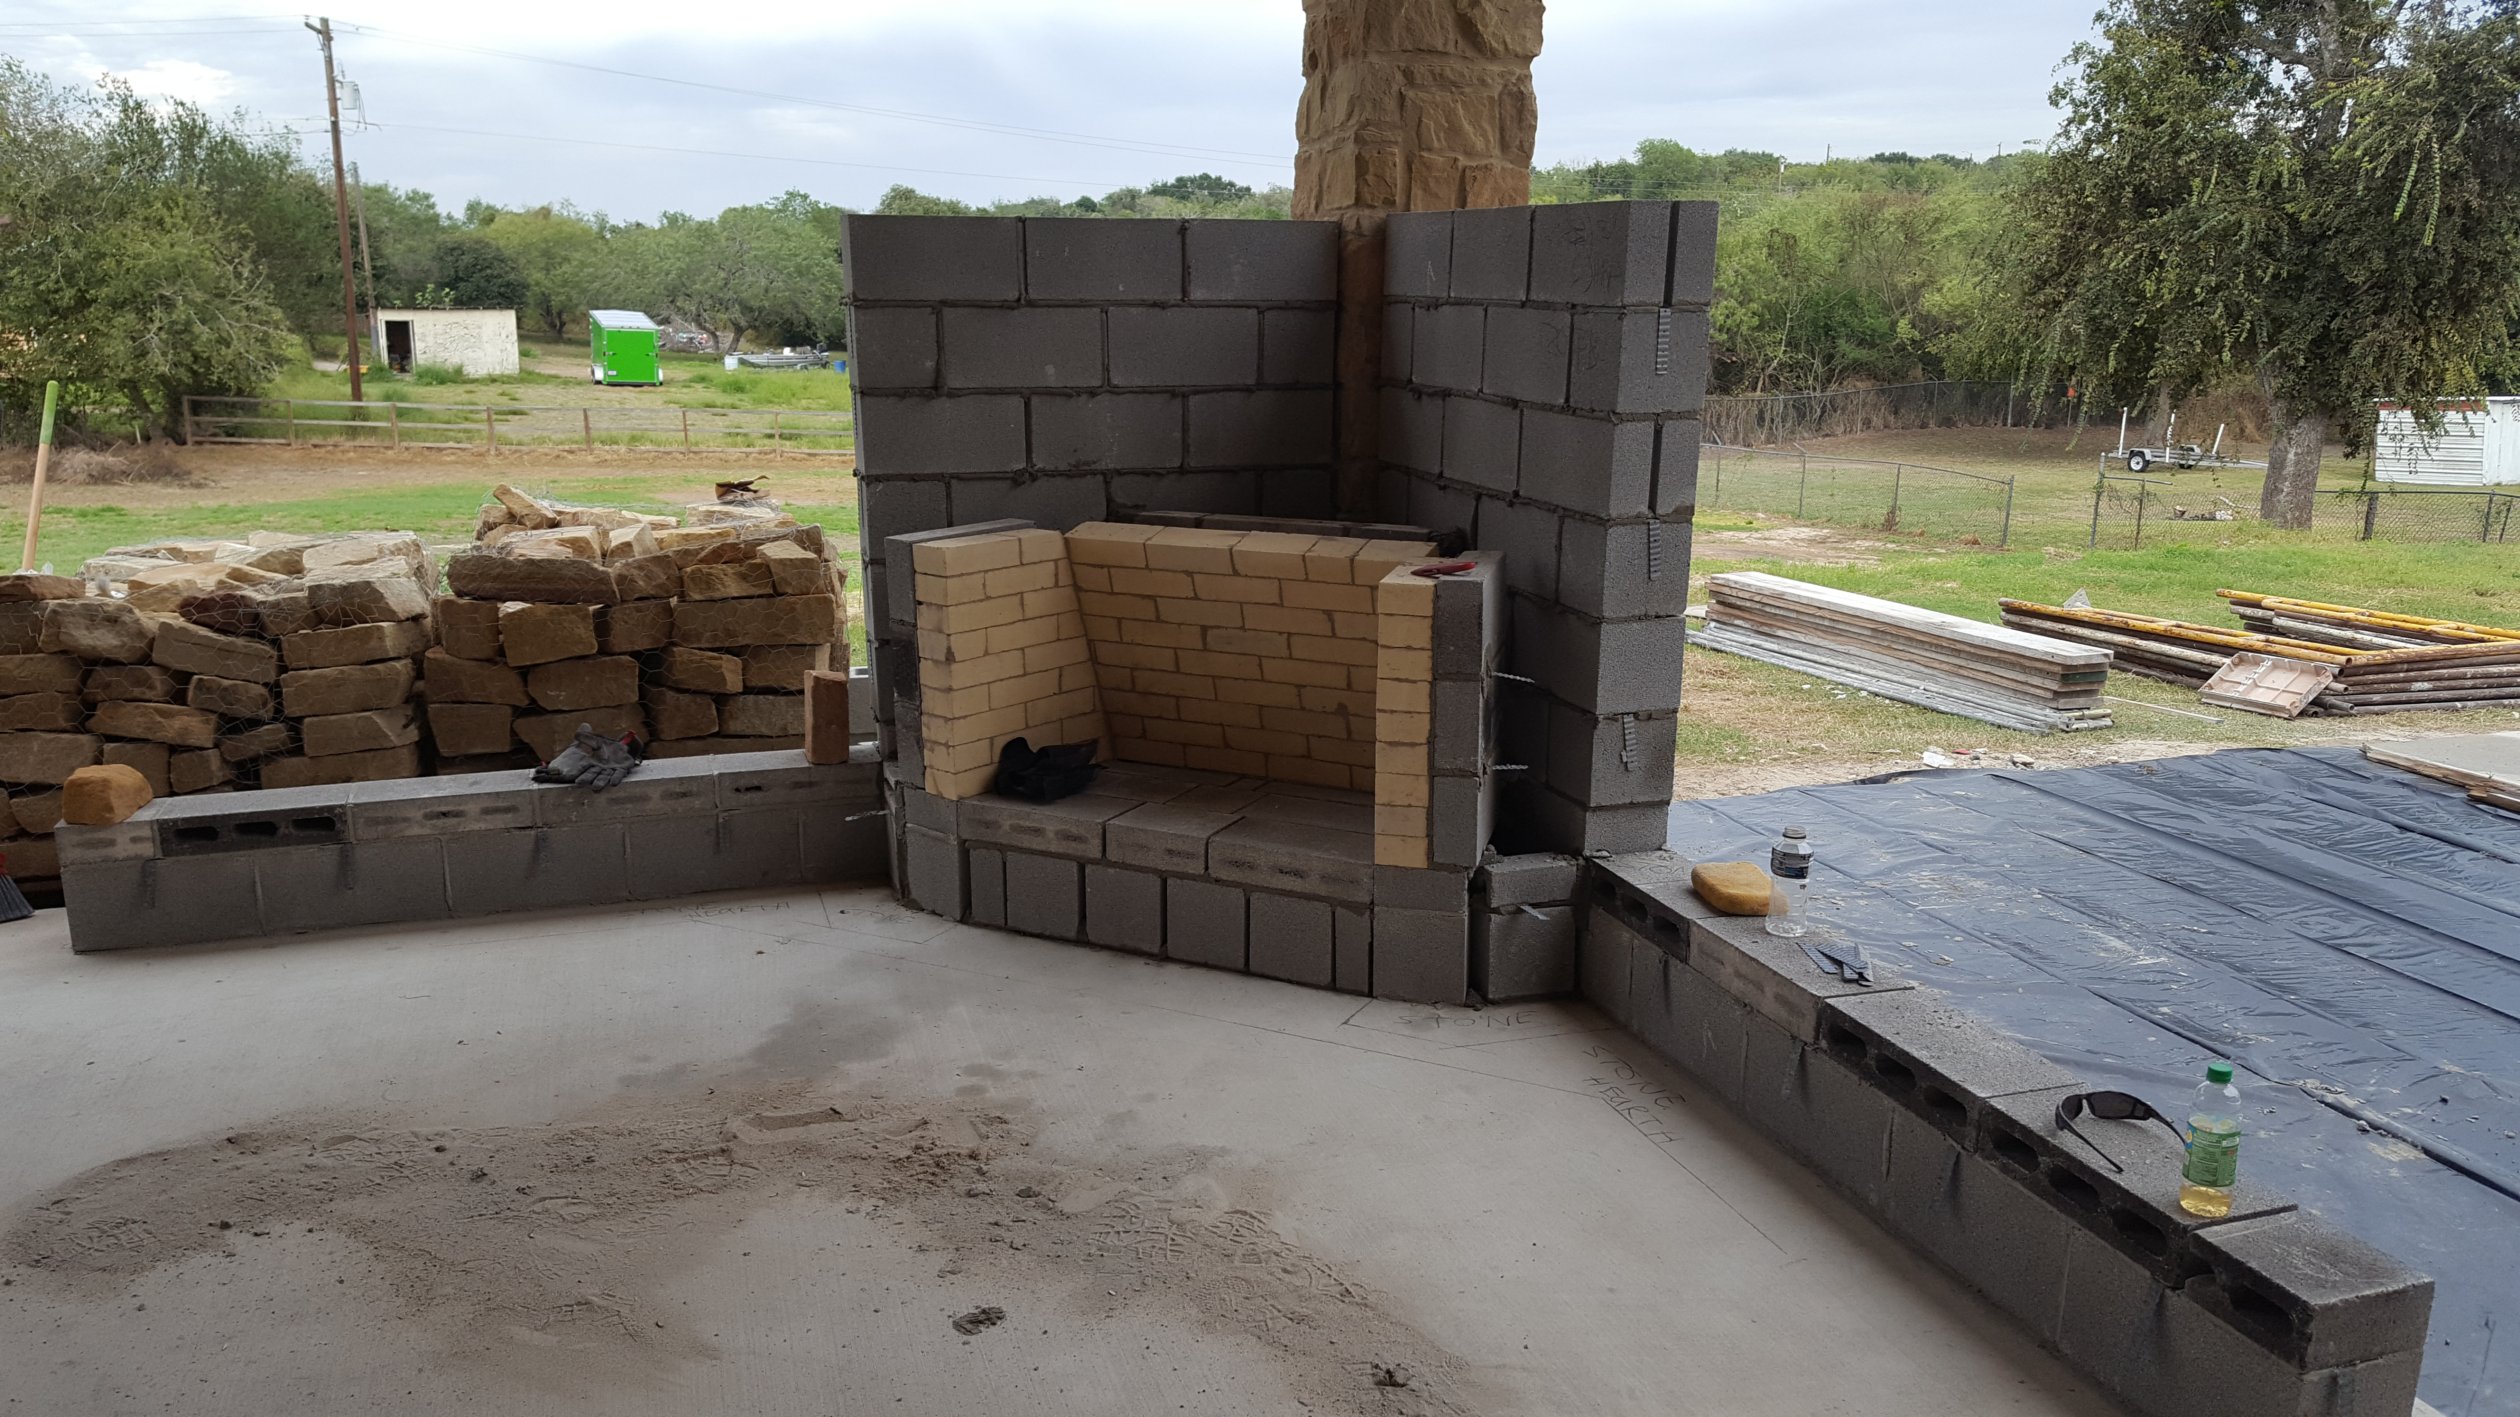 Starting from scratch with outdoor fireplace. 